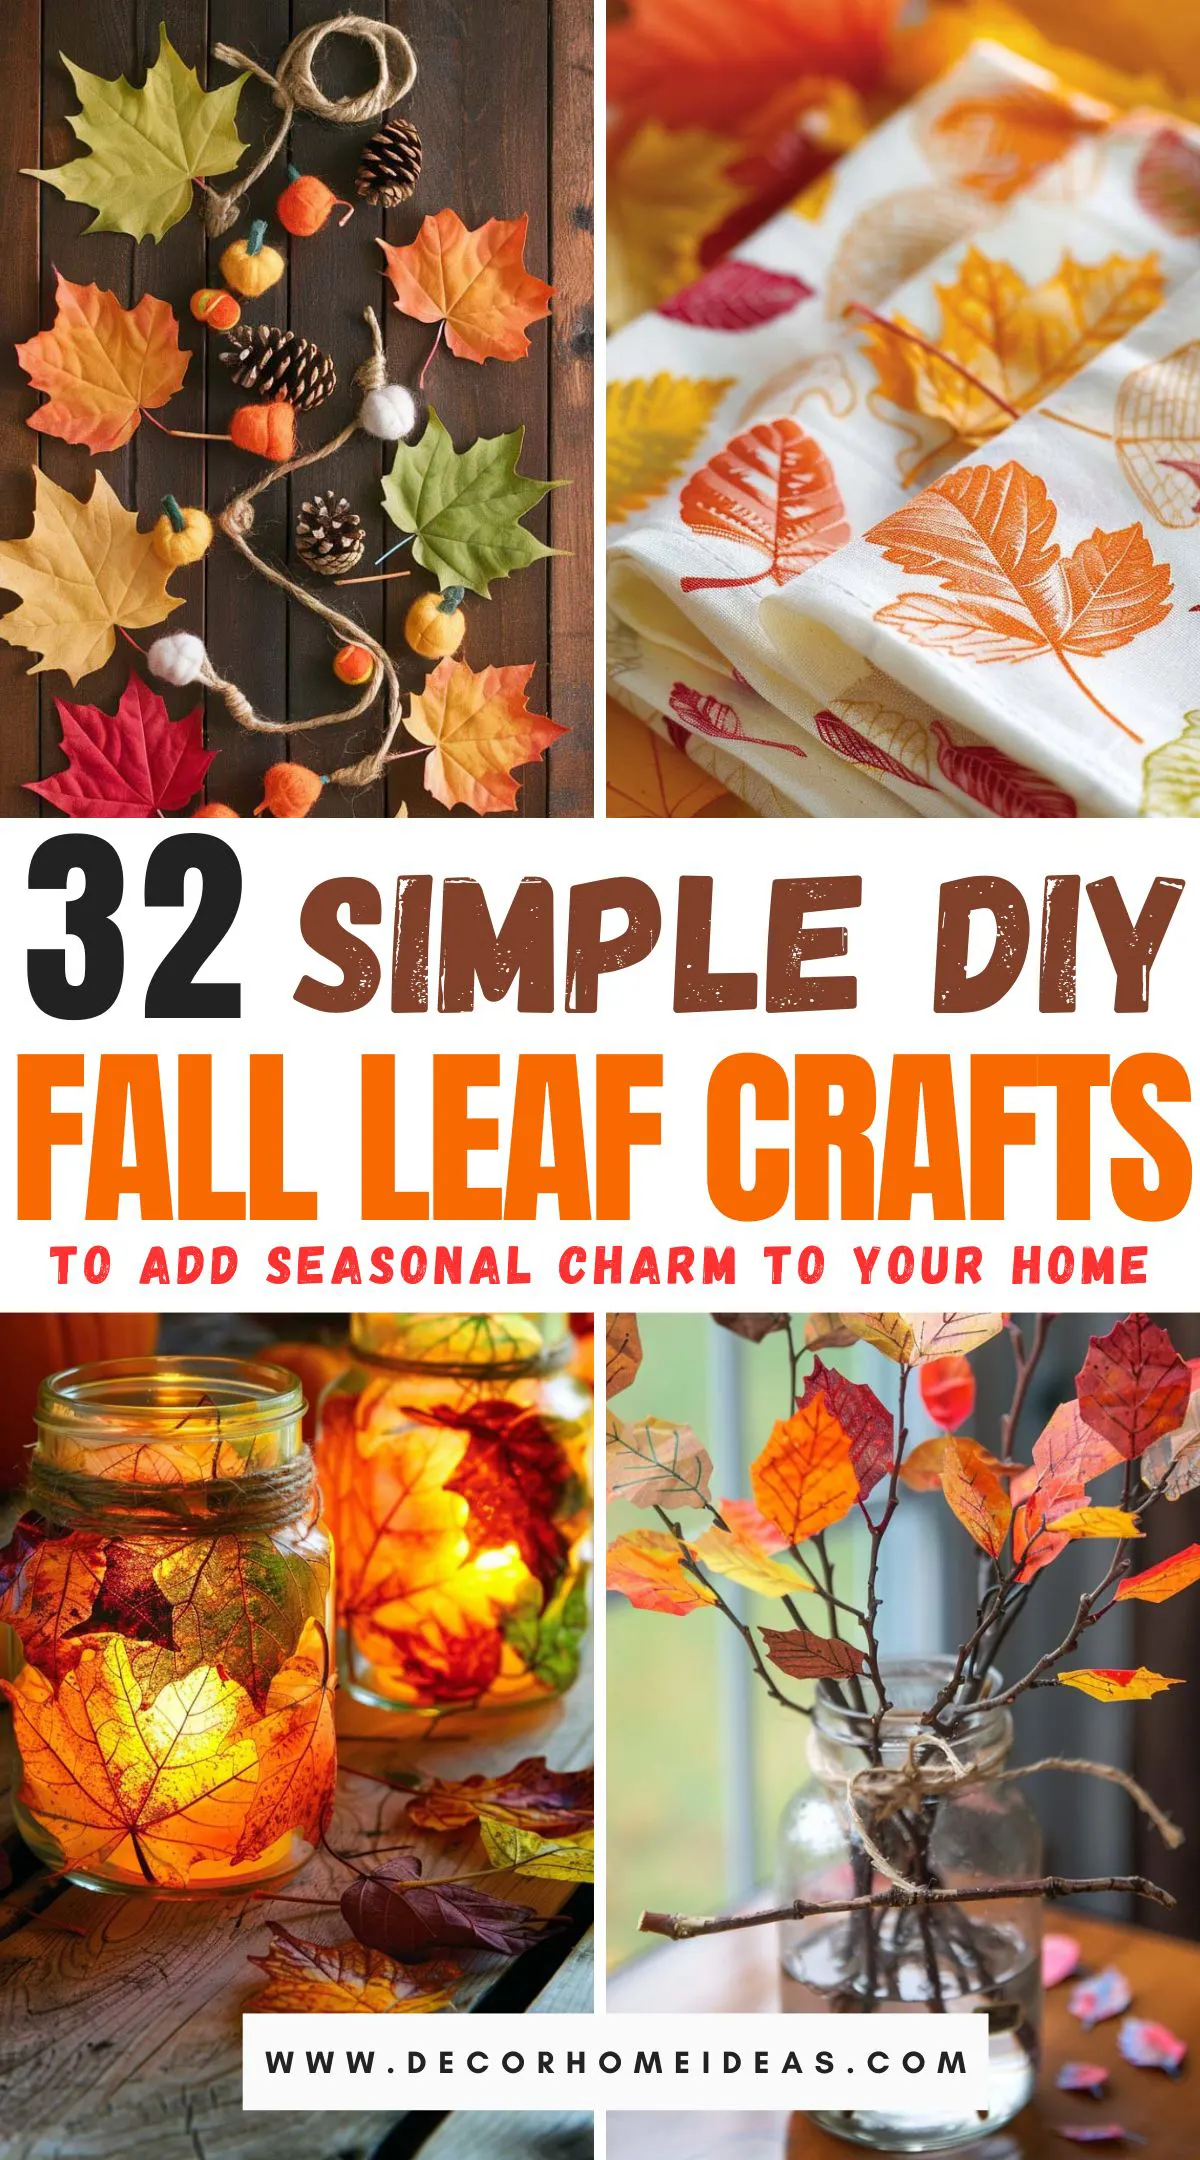 Embrace the beauty of autumn with 28 easy DIY fall leaf crafts that add seasonal charm to your home. From vibrant leaf garlands to elegant wreaths, discover creative projects that bring the warm colors of fall indoors. Learn how to make leaf-printed napkins, festive centerpieces, and more, using simple materials and techniques. Whether you’re looking to decorate your living room, dining area, or front porch, these delightful crafts will help you celebrate the season in style.